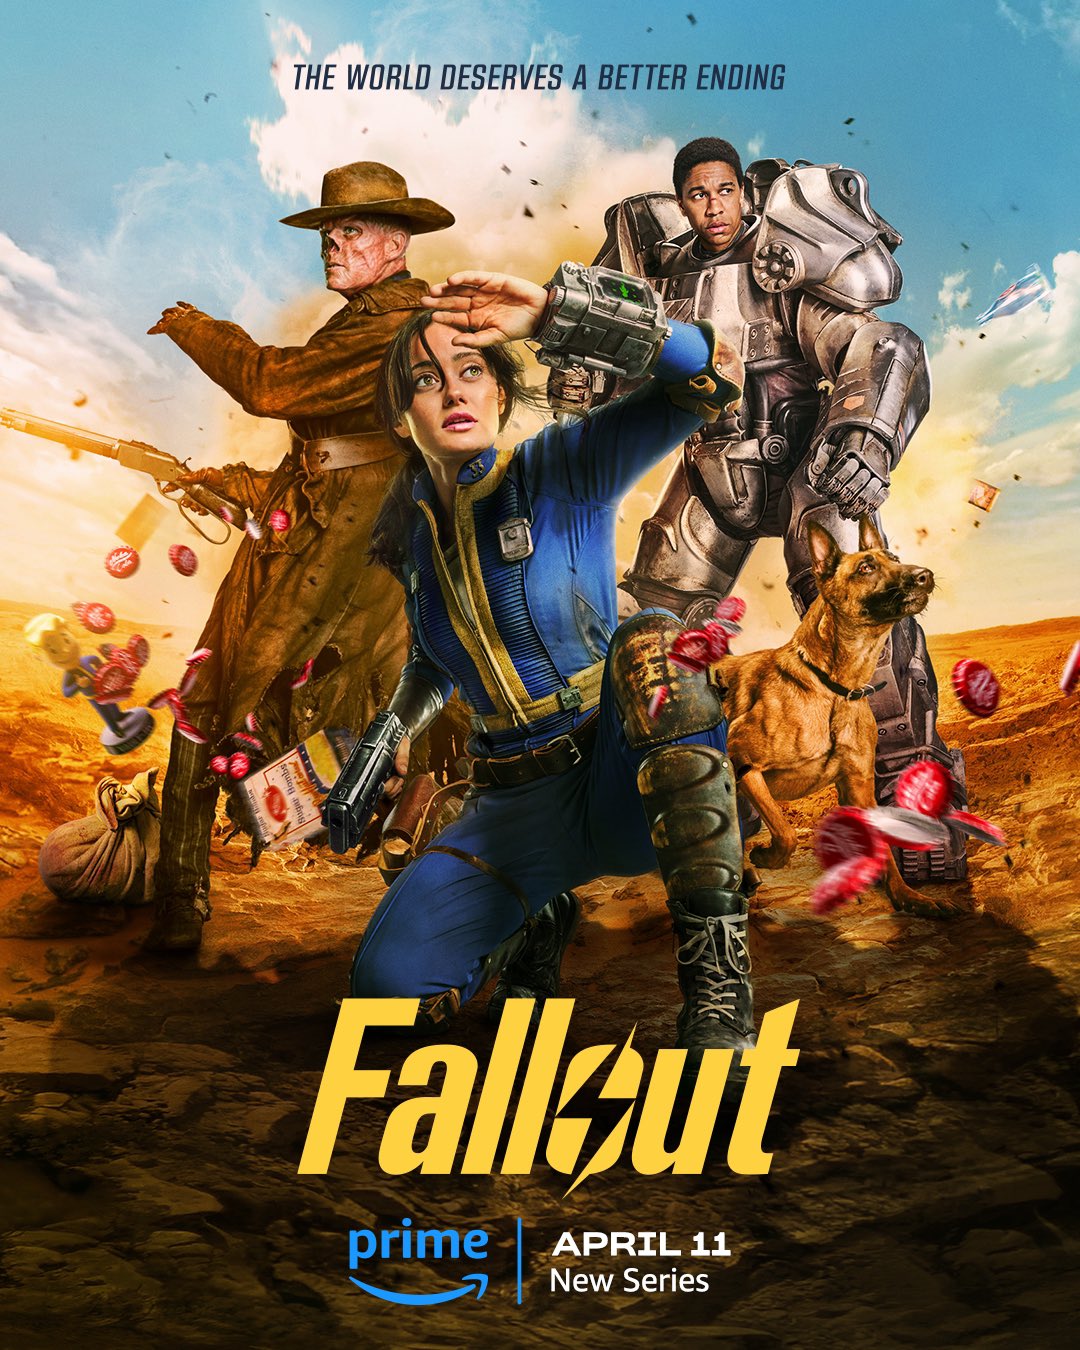 Trailer Released For New Prime Video Series "Fallout"